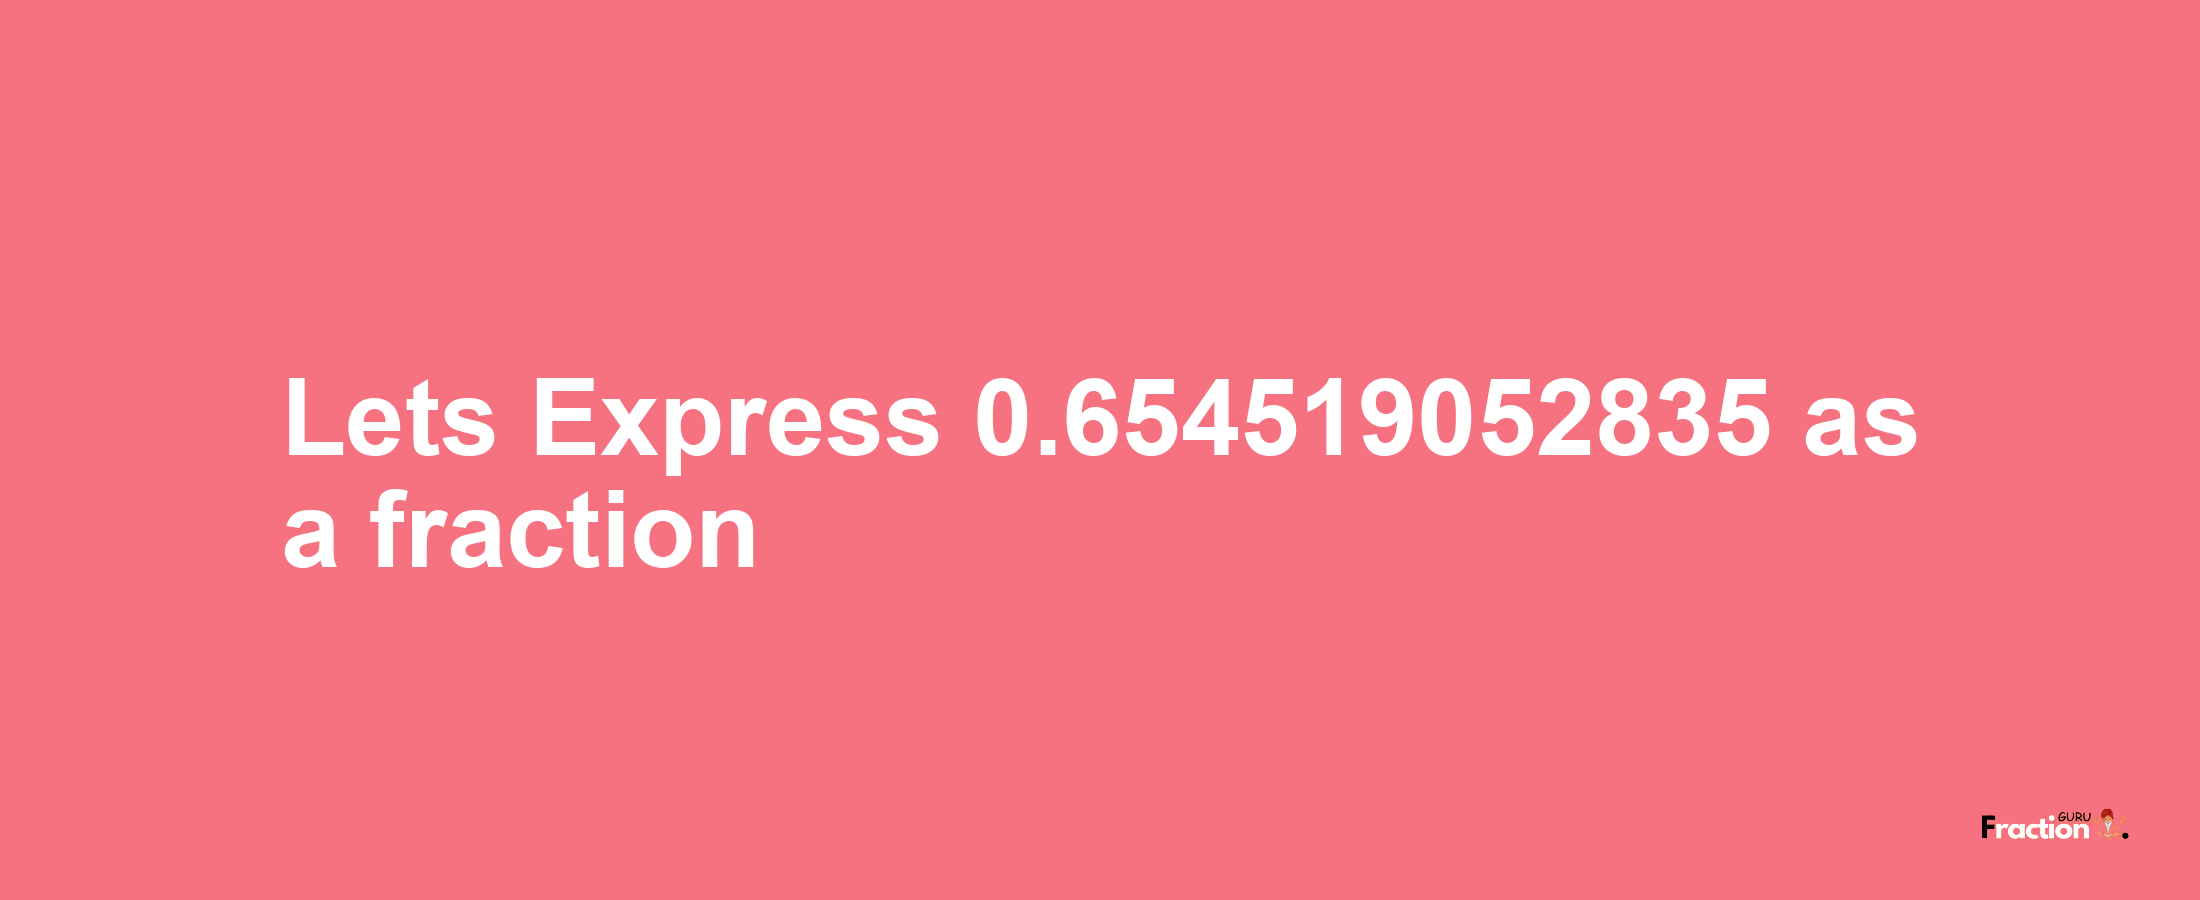 Lets Express 0.654519052835 as afraction